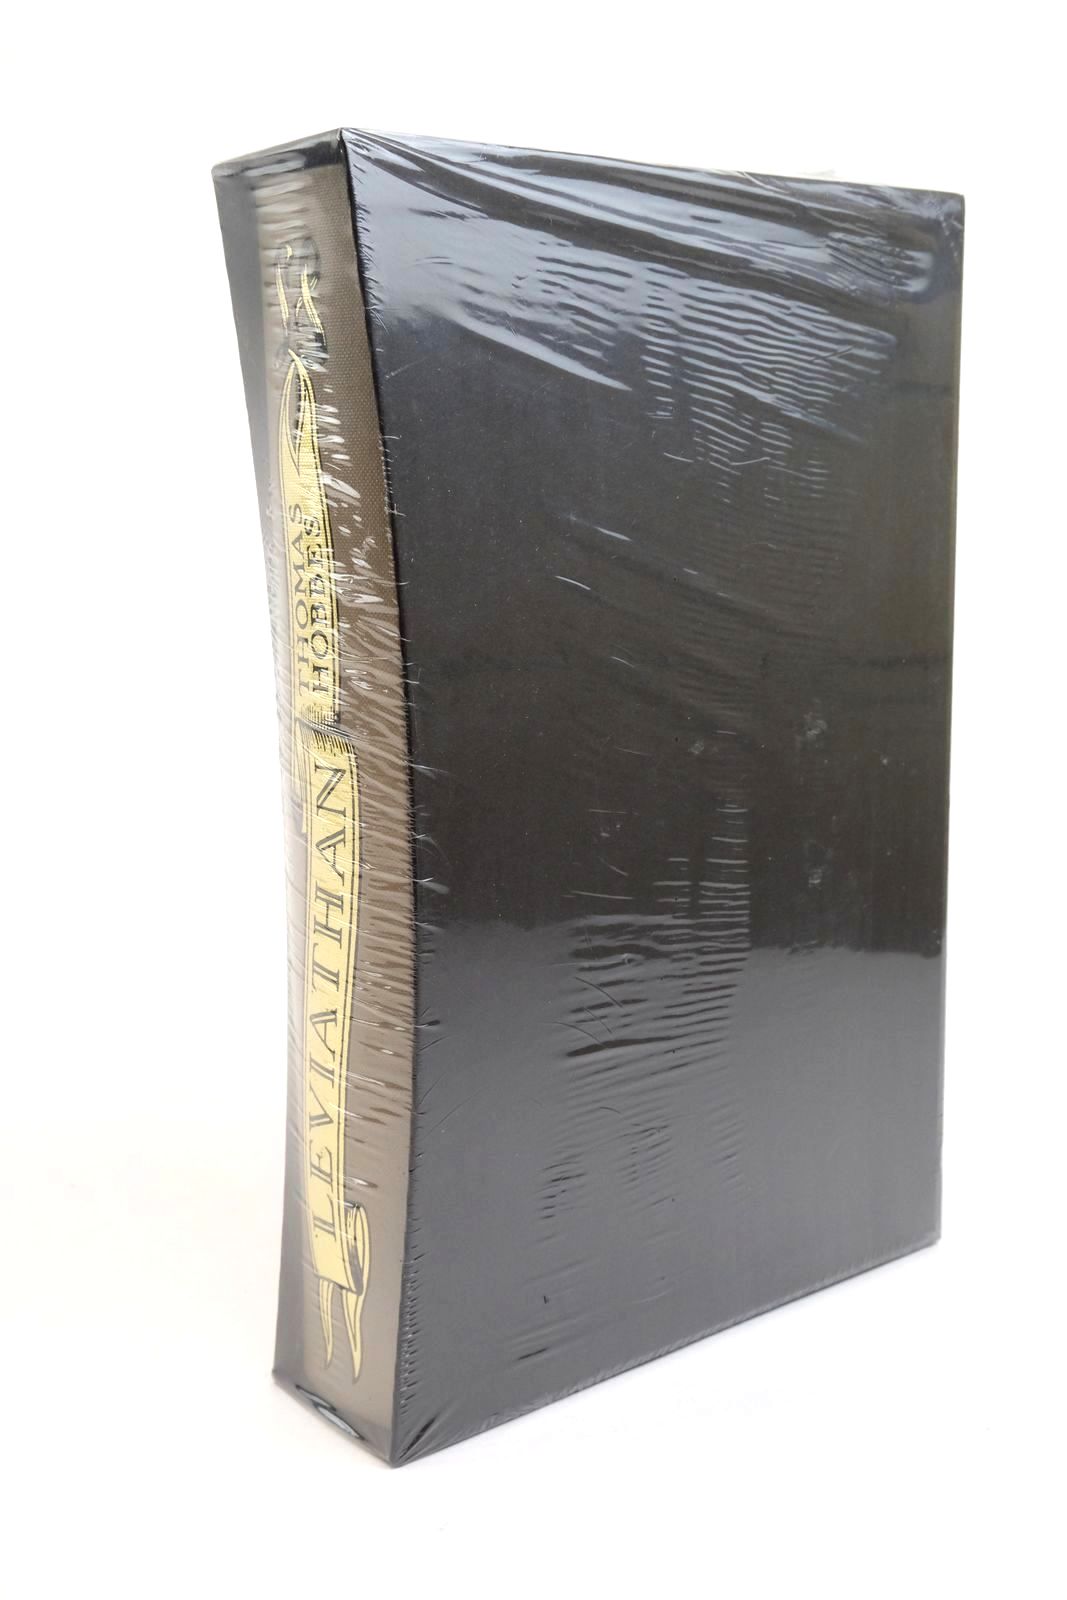 Photo of LEVIATHAN written by Hobbes, Thomas published by Folio Society (STOCK CODE: 1322333)  for sale by Stella & Rose's Books